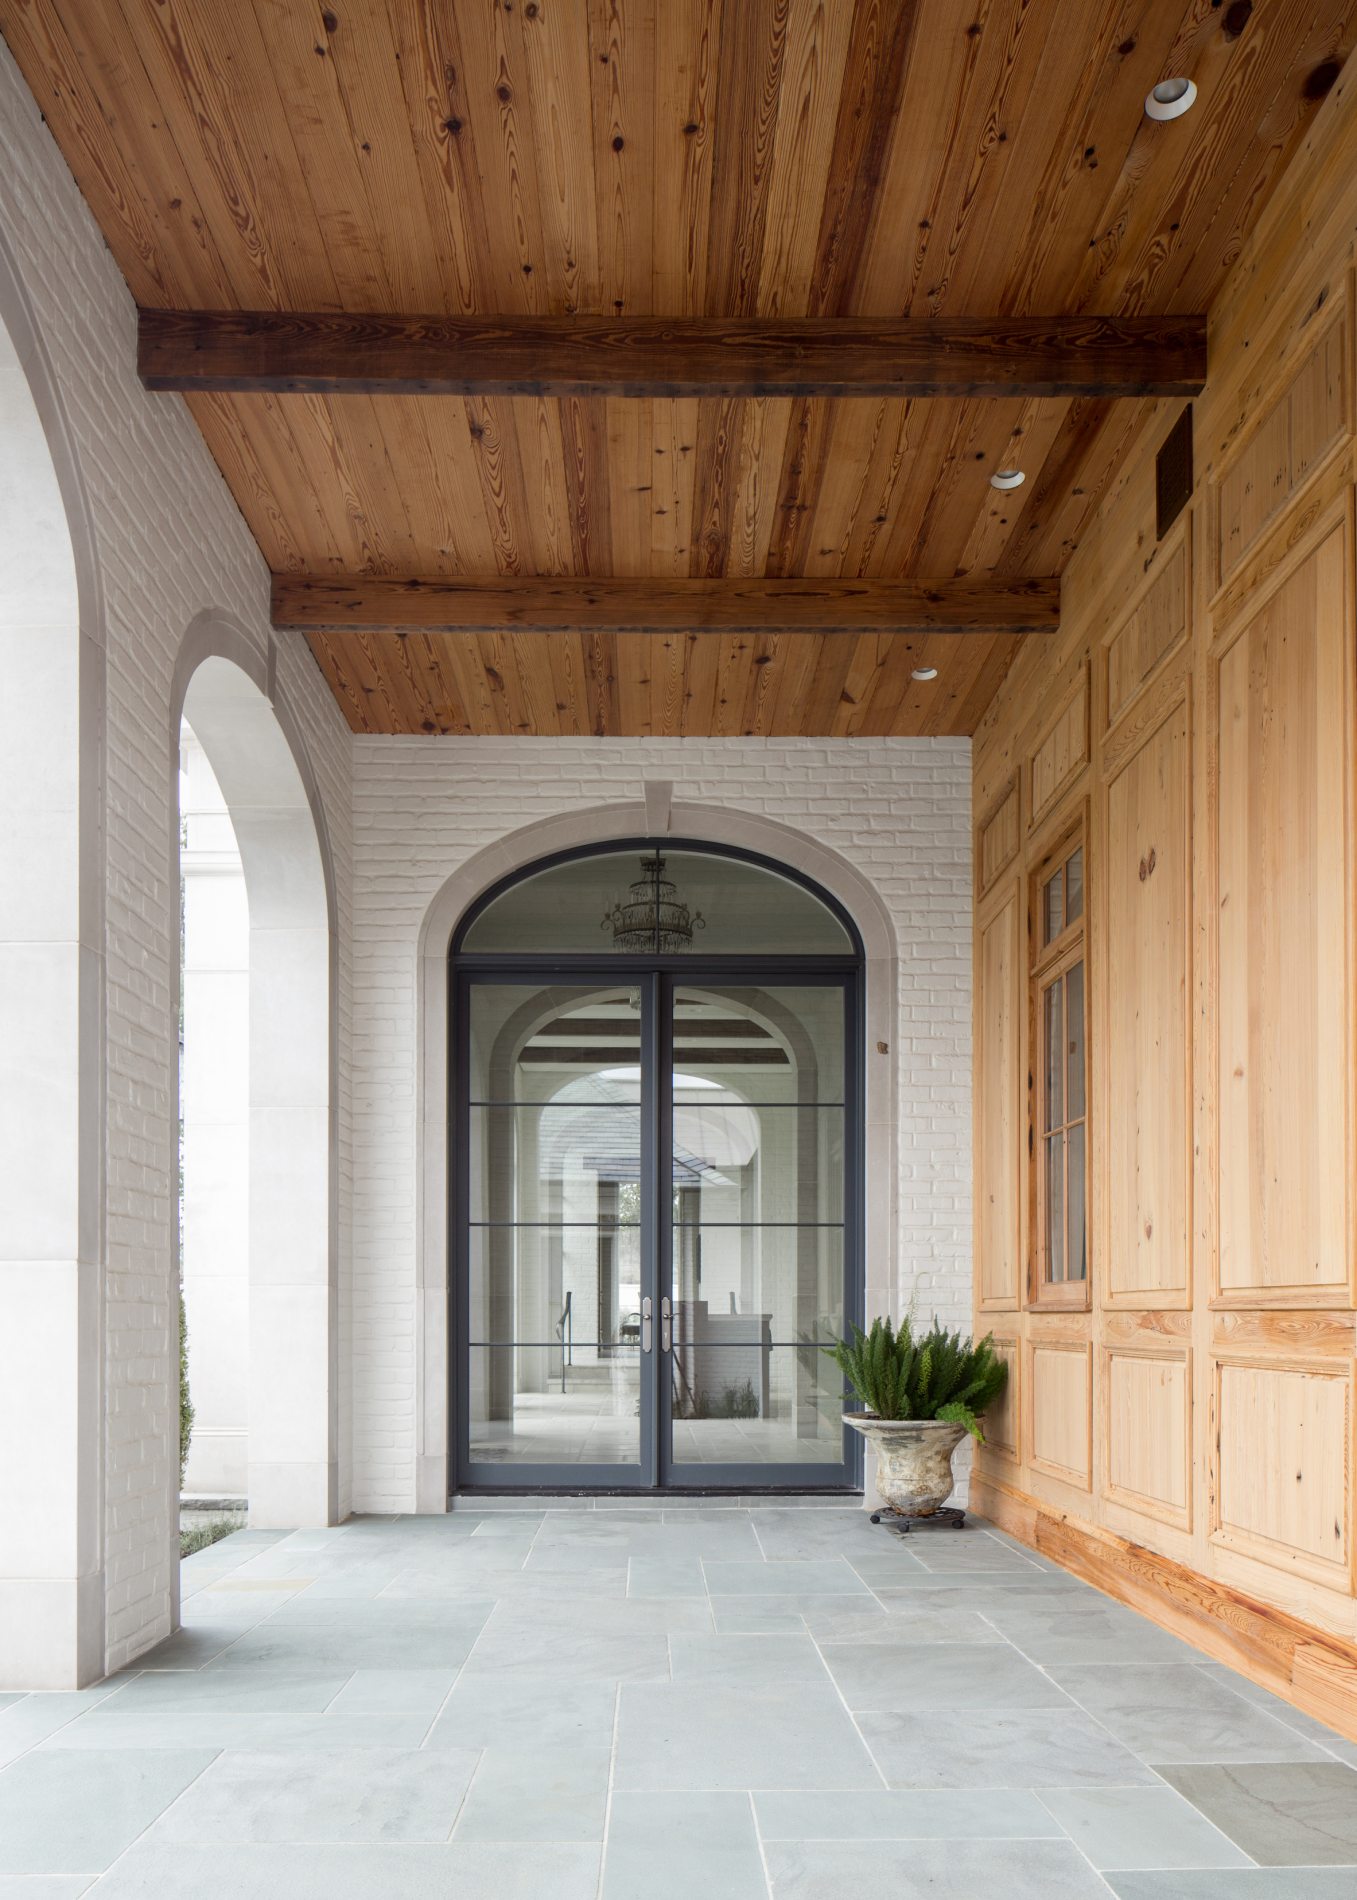 Exterior view of the front porch at French Influential, a custom home designed and built by Farmer Payne Architects.